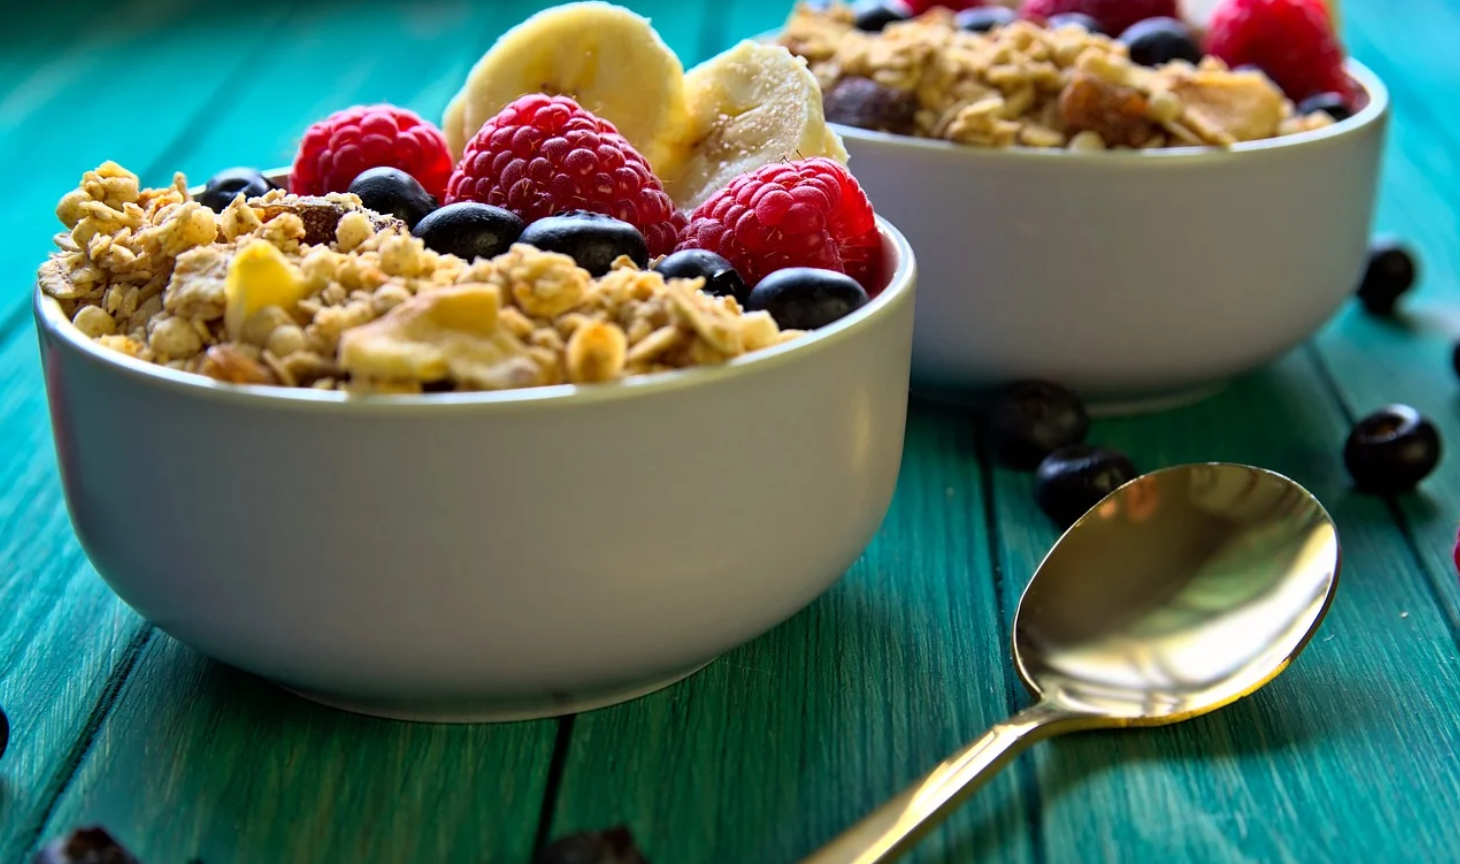 Oatmeal with berries and fruit